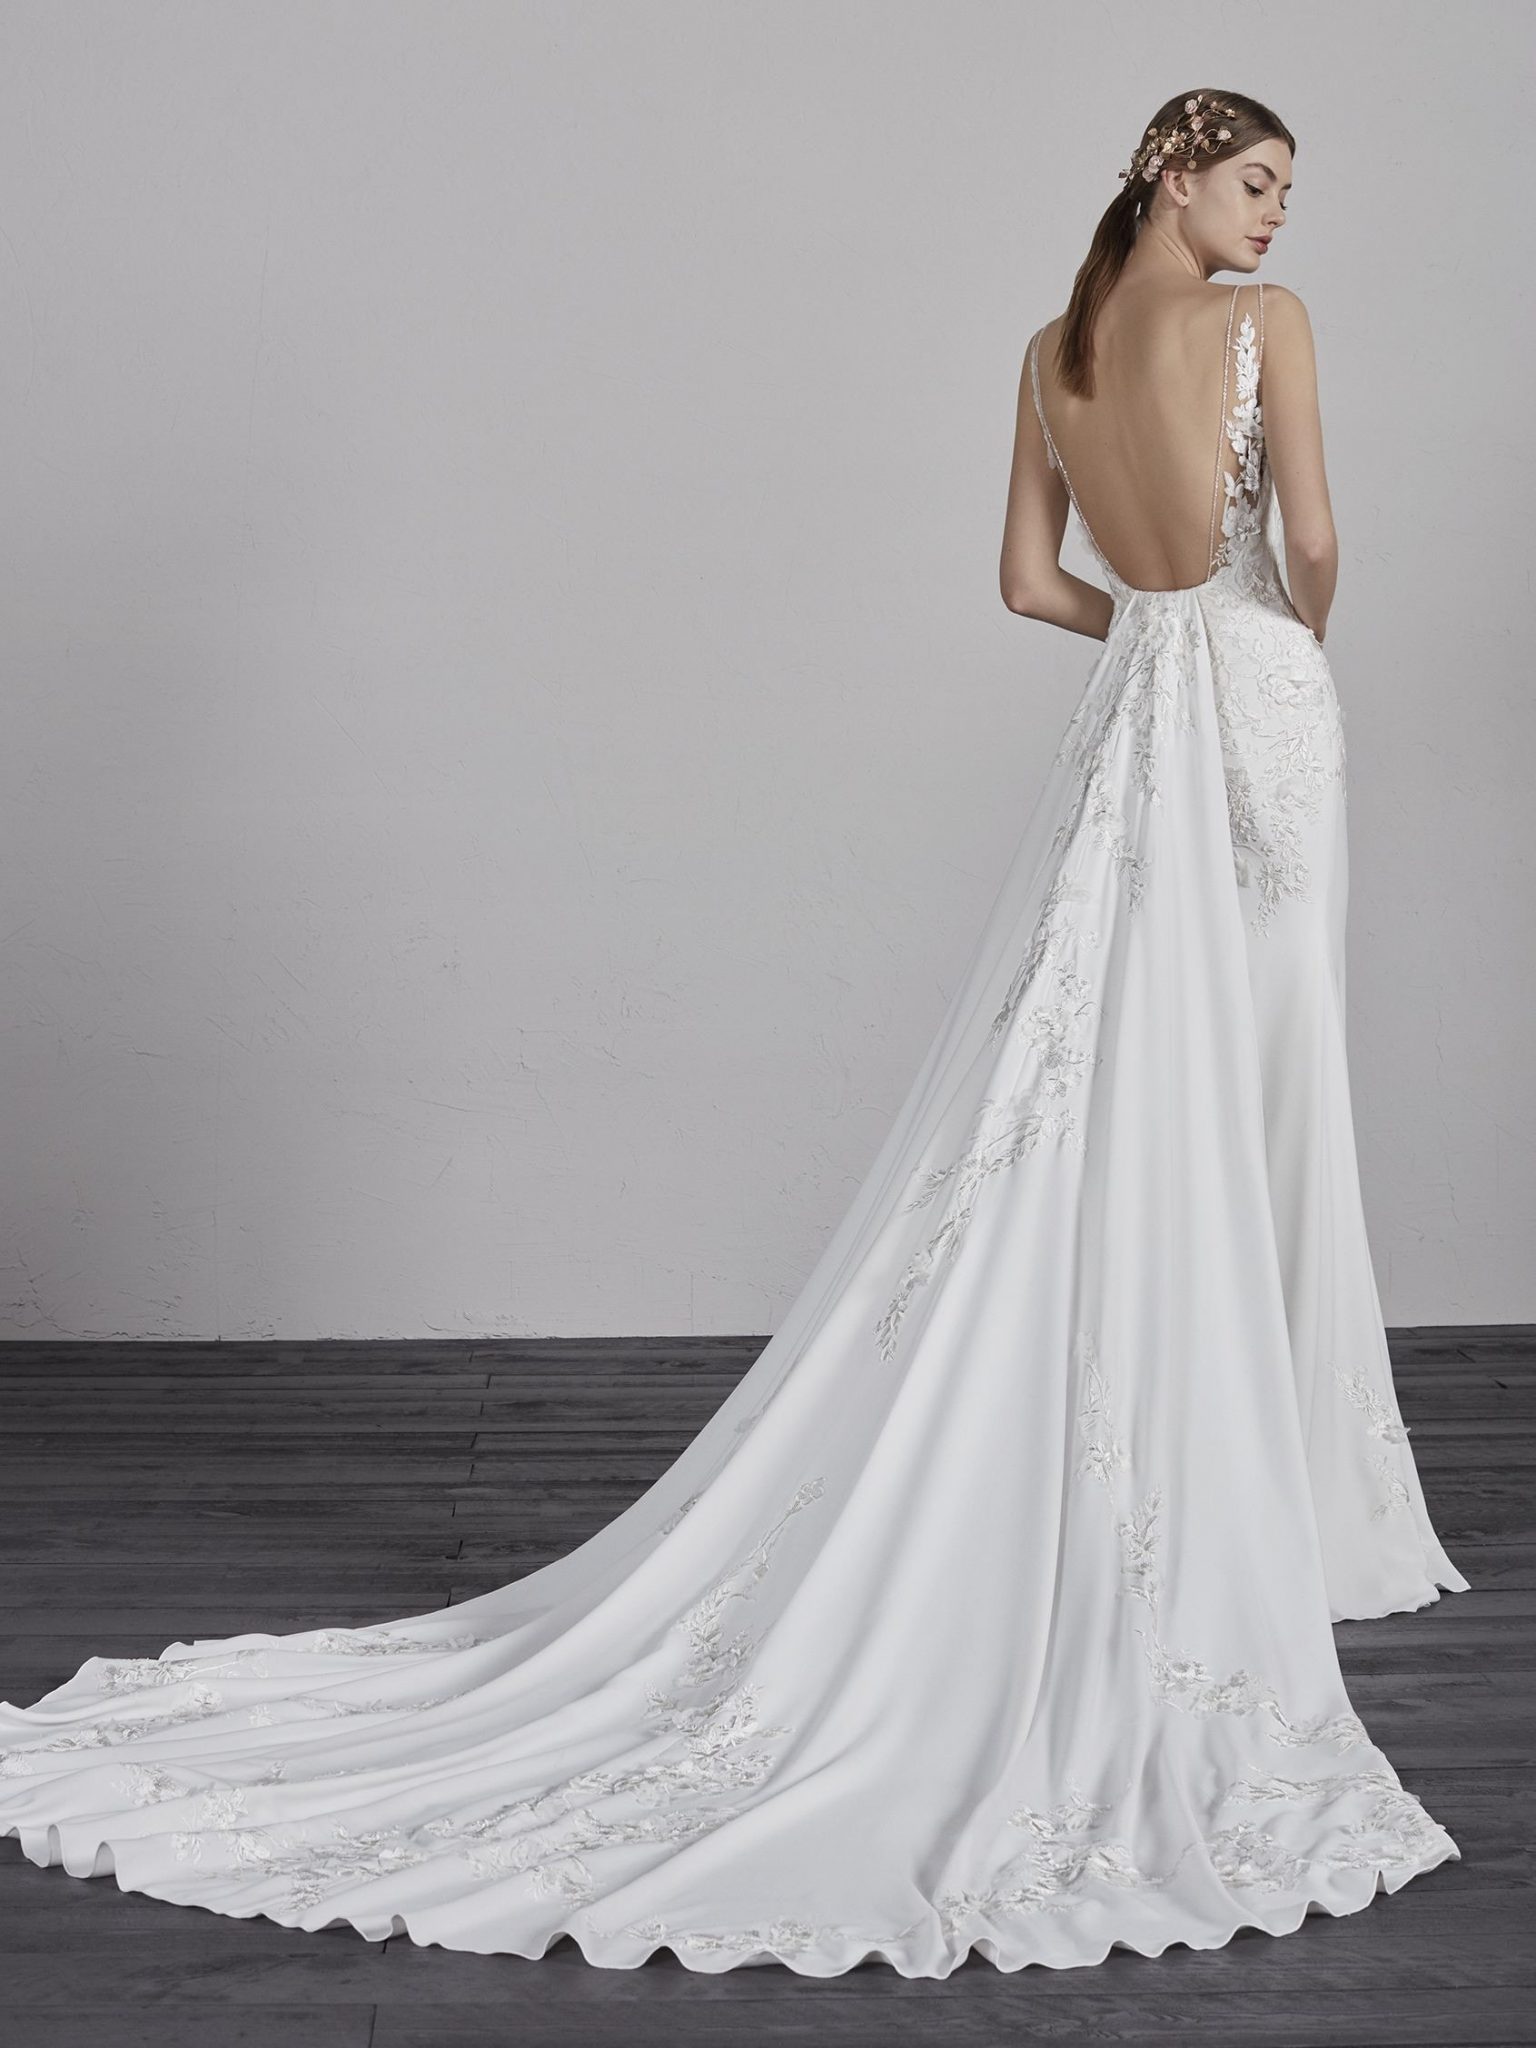 Stunning Wedding Gown With Detachable Train Modes Bridal Nz 9259